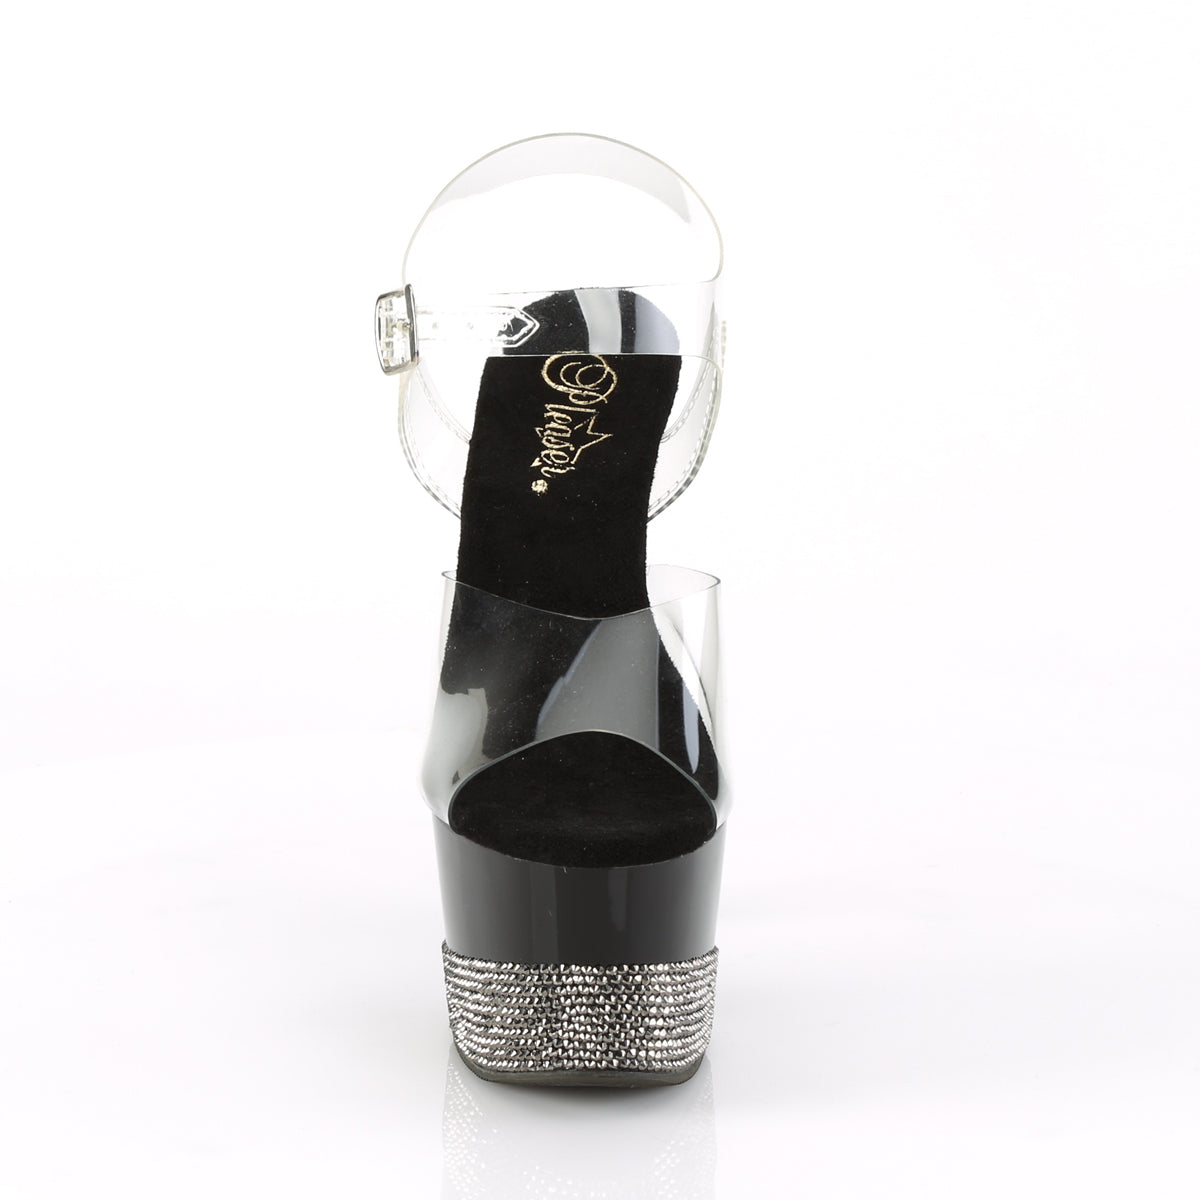 ADORE-708-3 Heels ClearBlack Pewter Bling Pole Dancing Shoes-Pleaser- Sexy Shoes Alternative Footwear